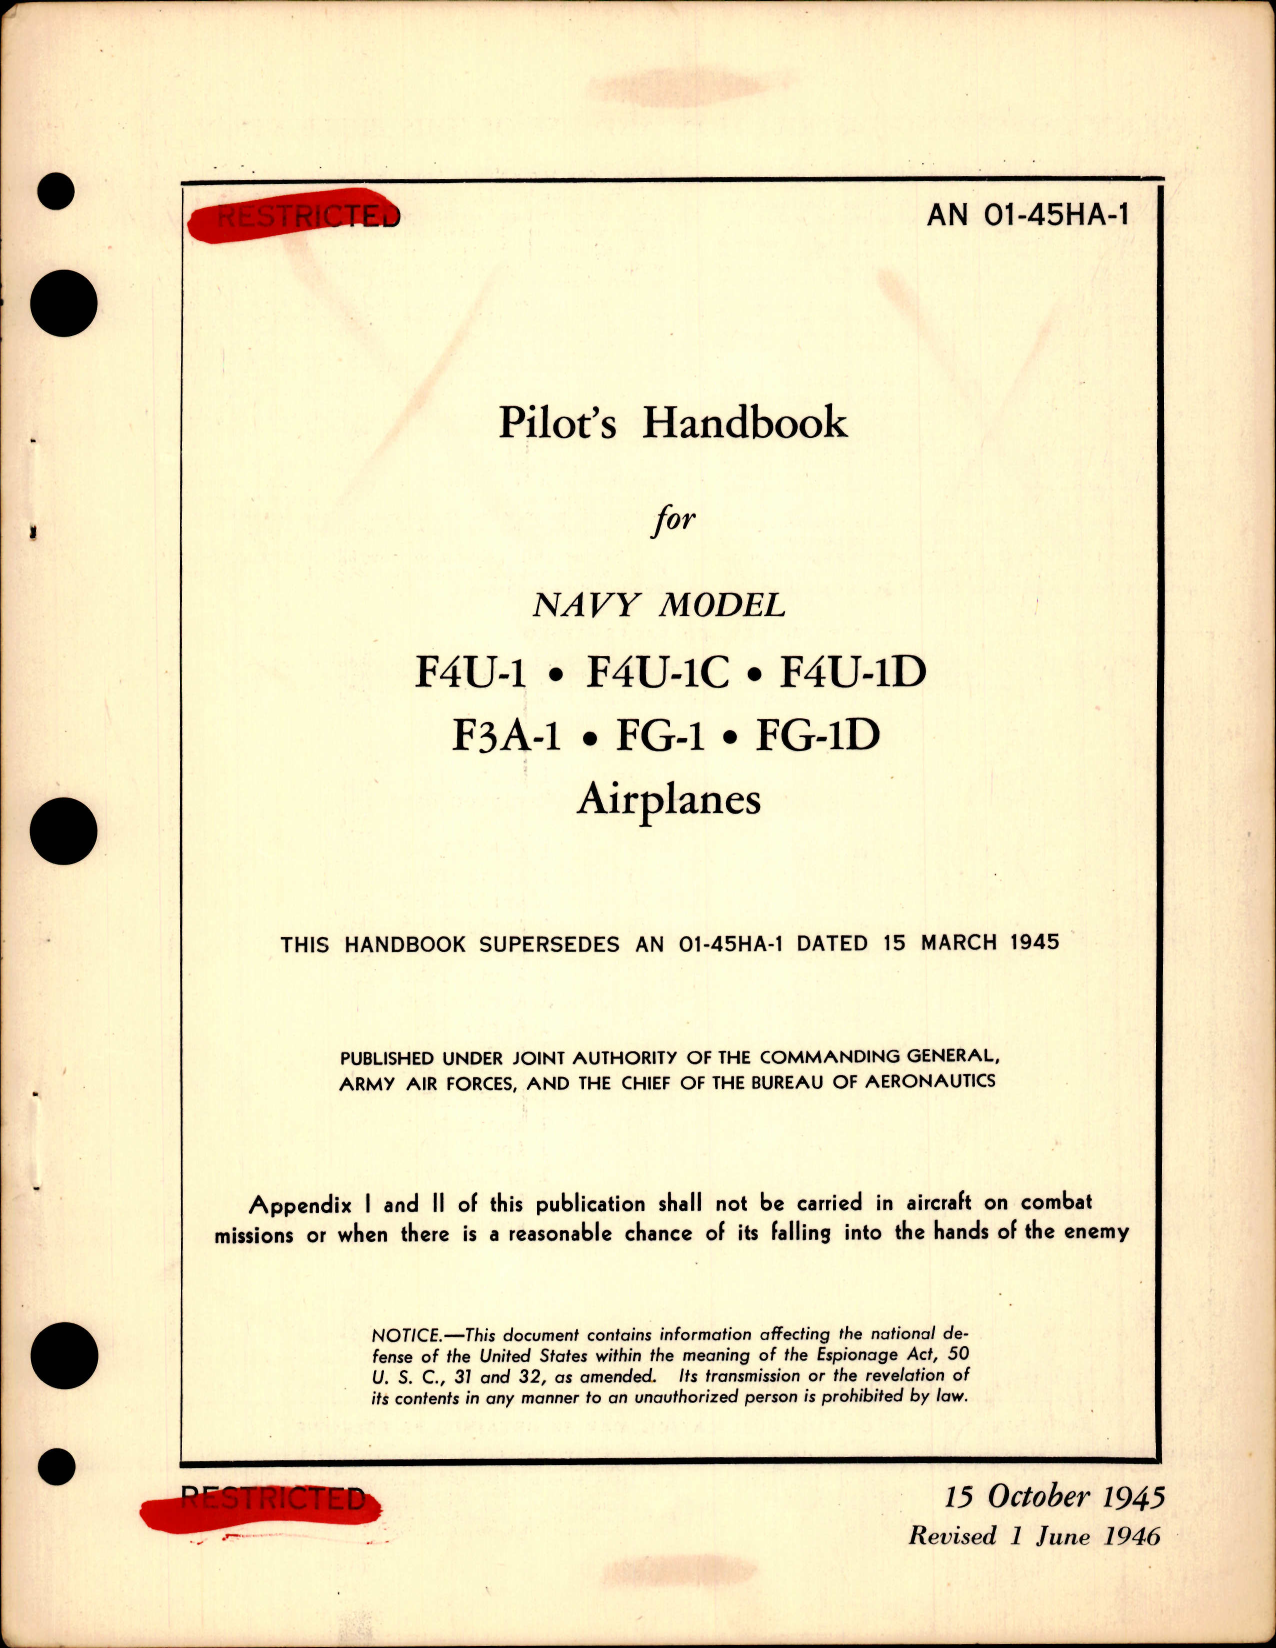 Sample page 1 from AirCorps Library document: Pilot's Handbook for F4U-1, F4U-1C, F4U-1D, F3A-1, FG-1, FG-1D